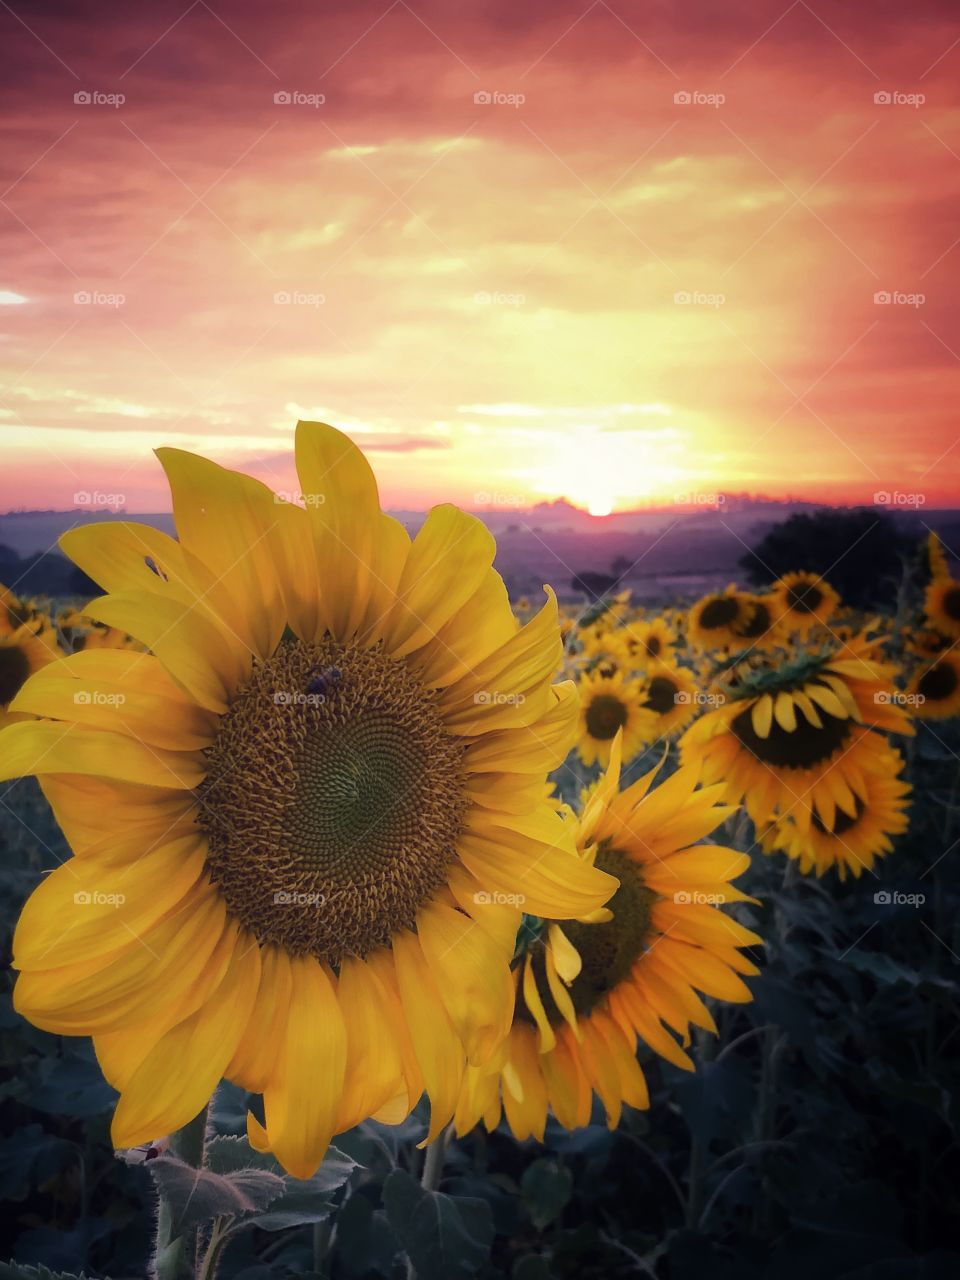 Sunset view from a Sunflower field. The colors were amazing in the sky, creating an amazing background for the beautiful Sunflowers.